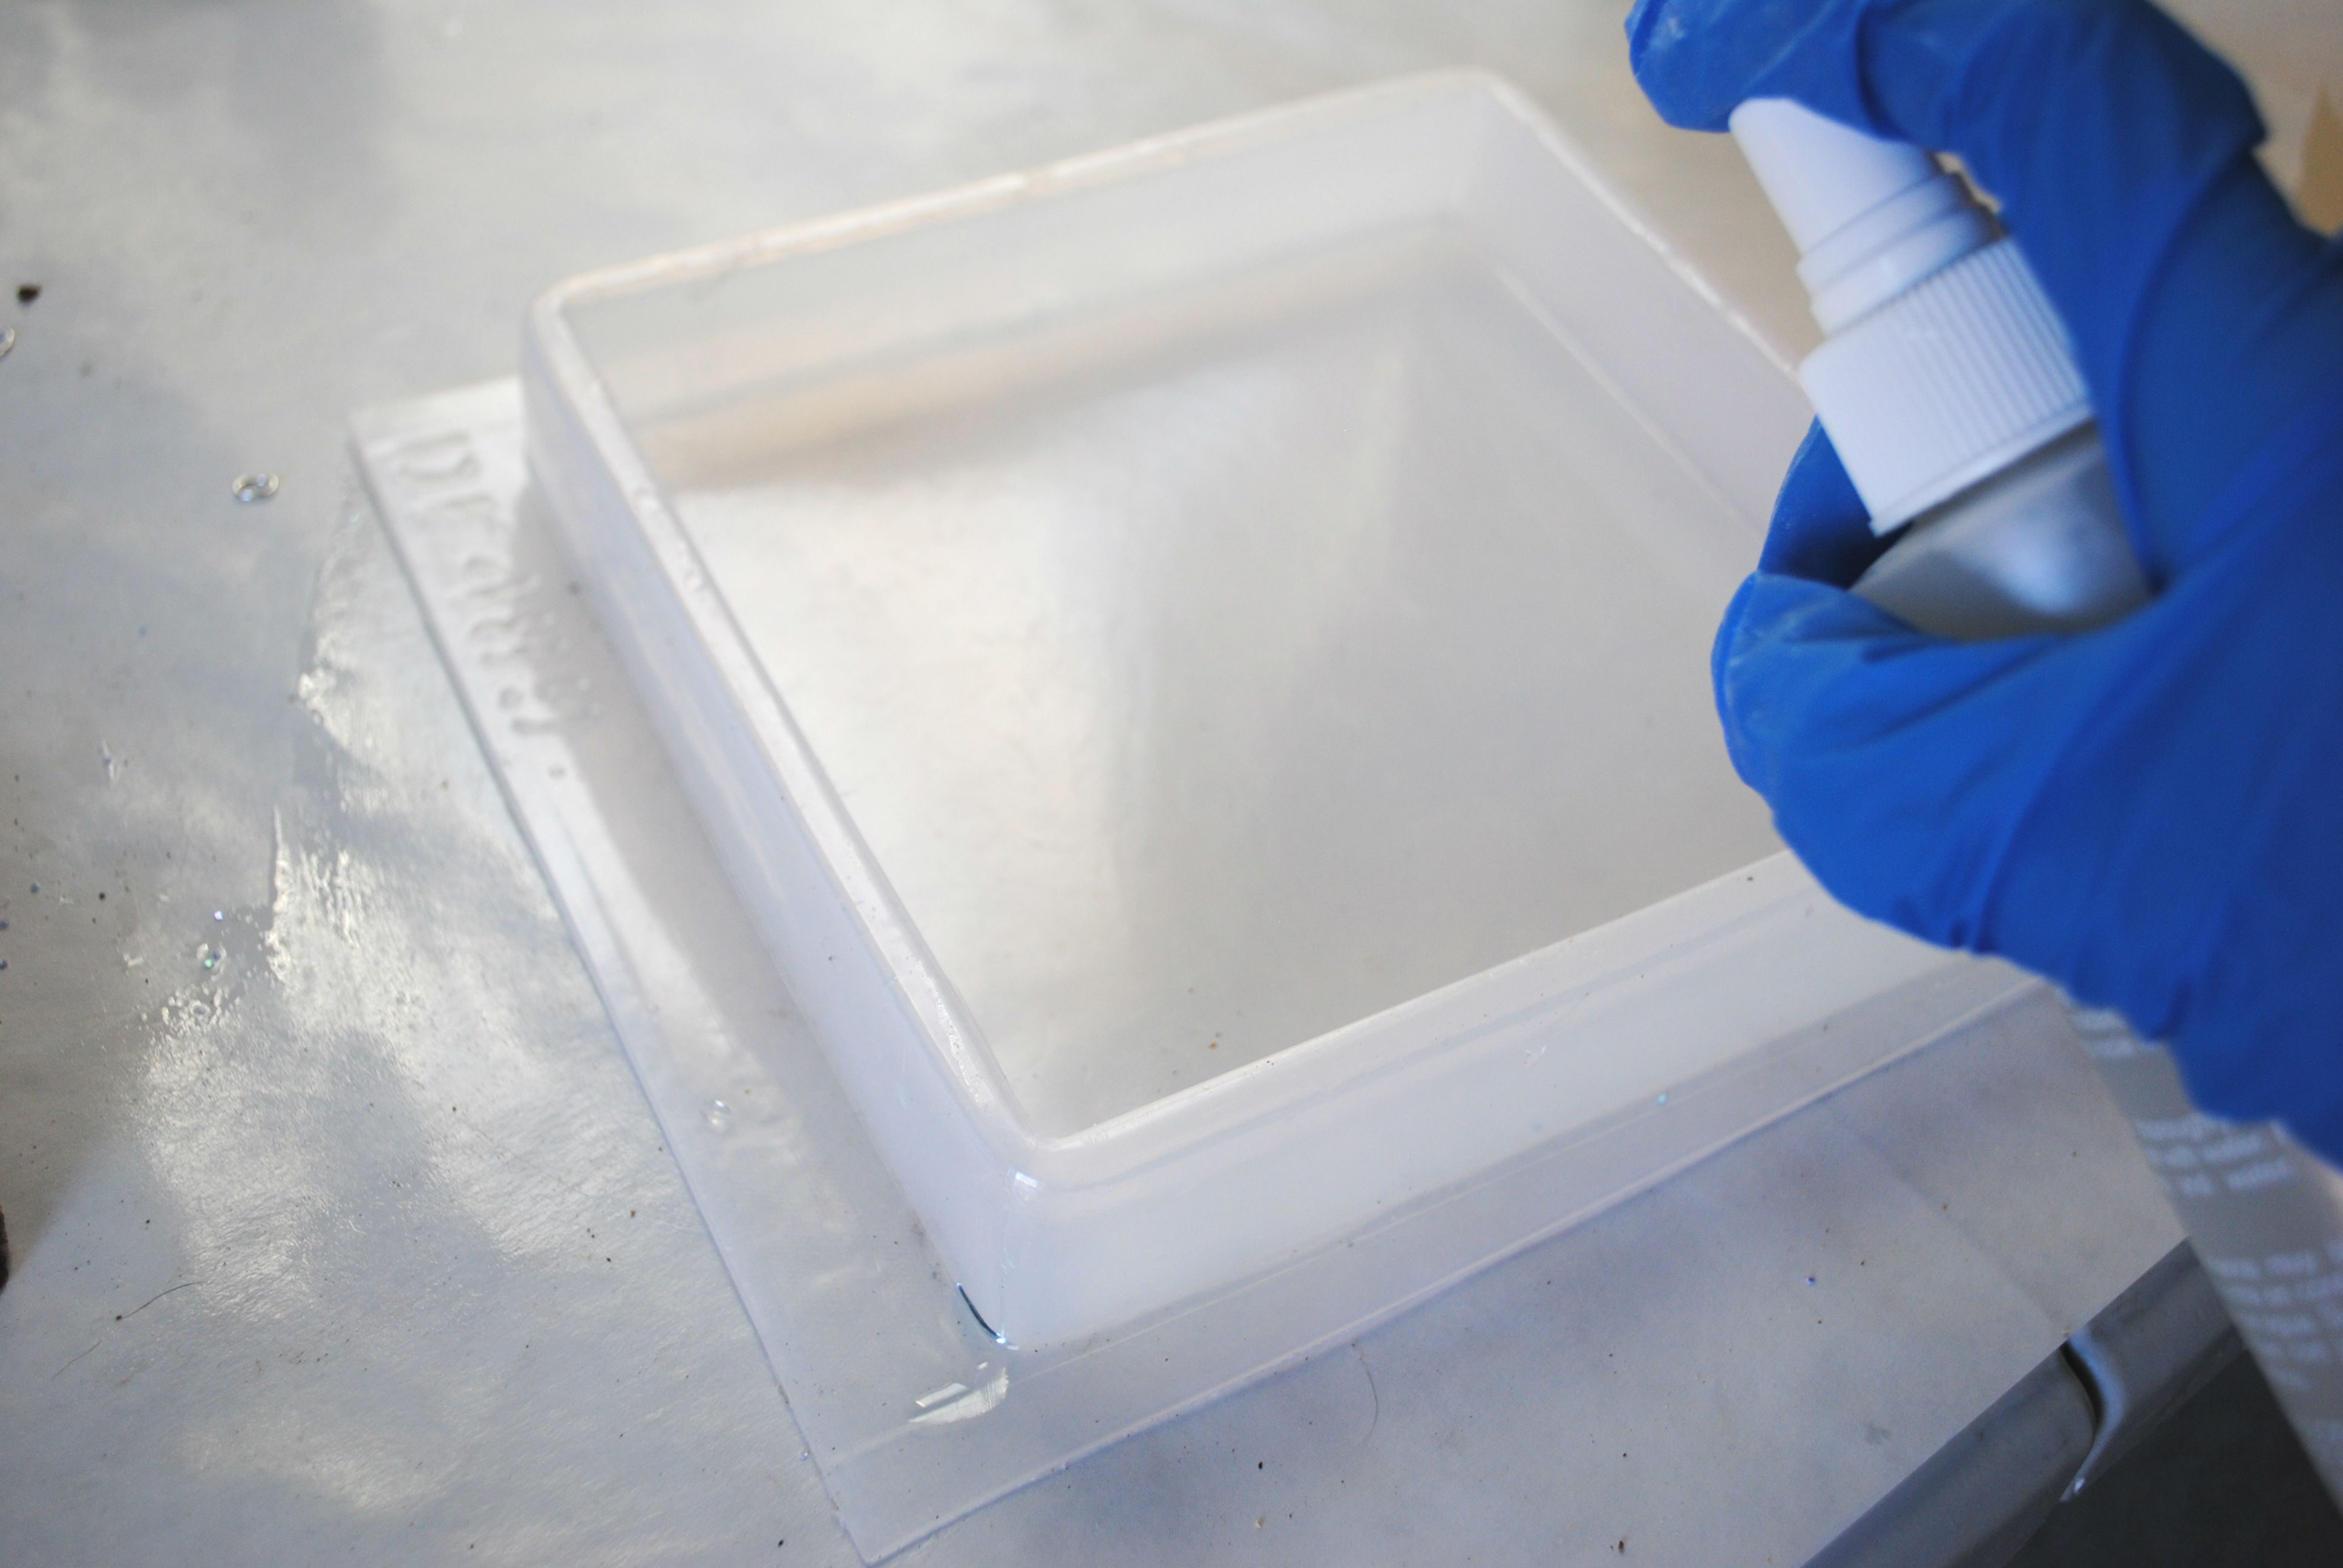 empty resin mold on table being prepared for use